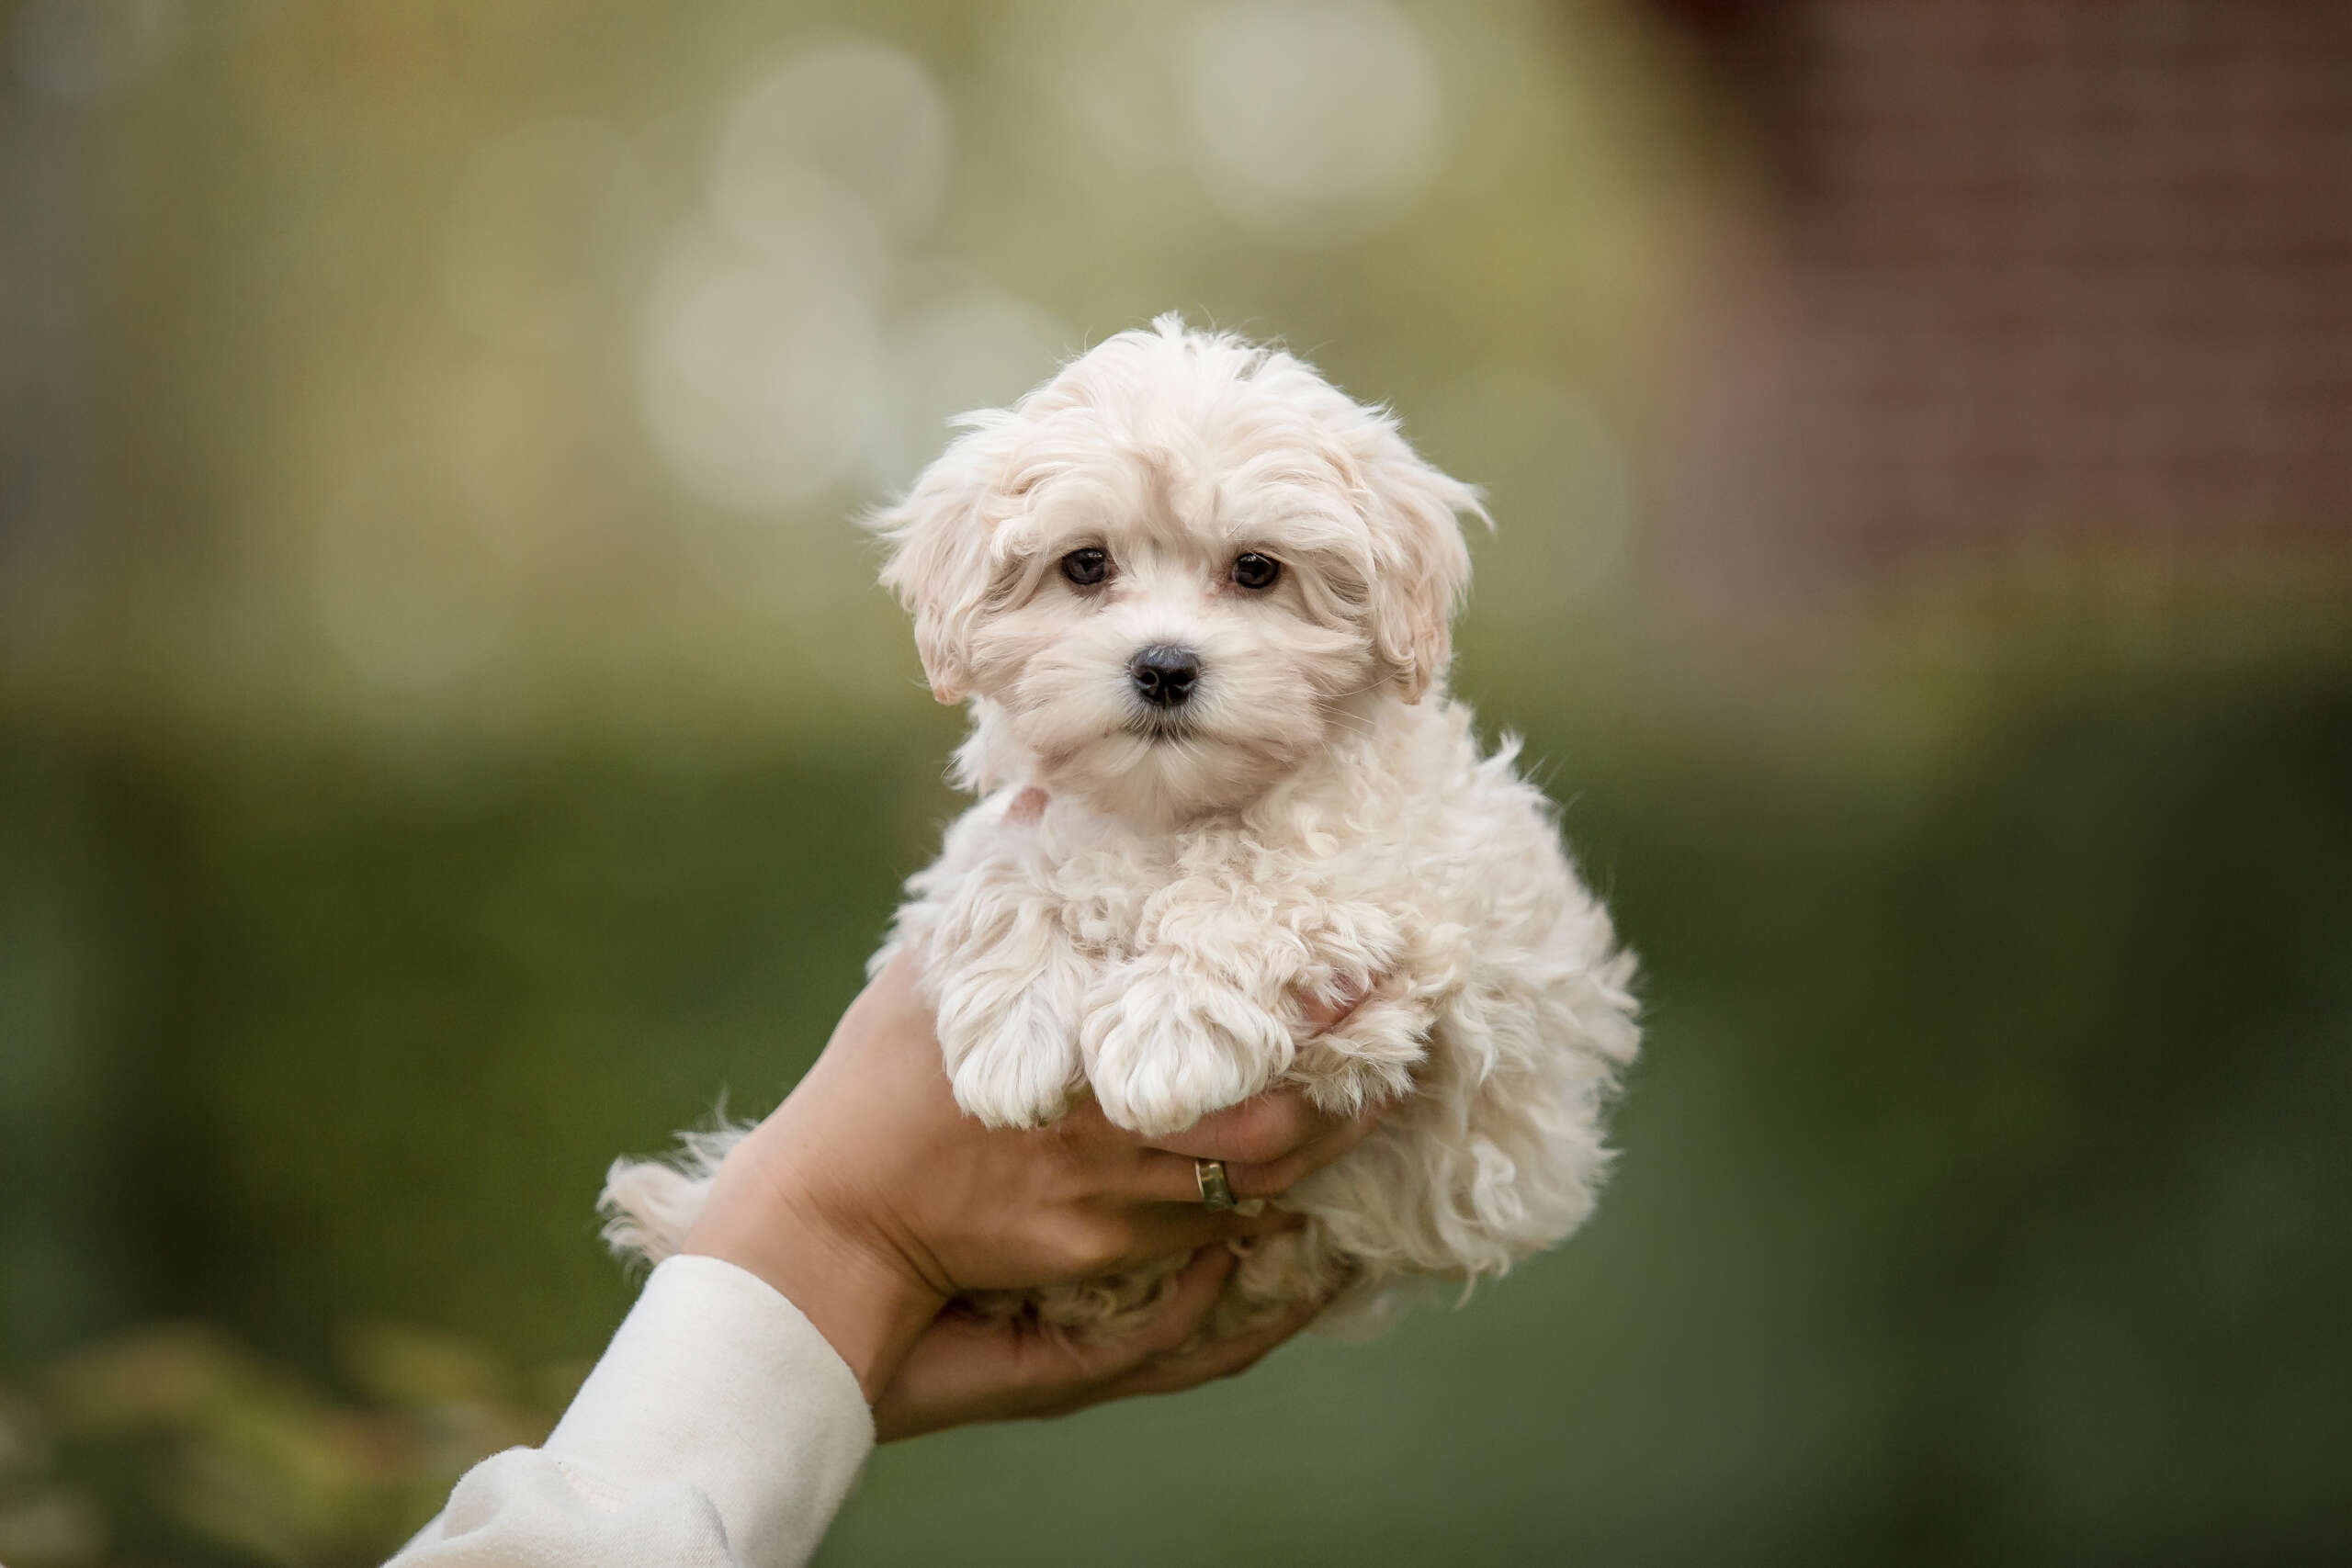 Adorable,Maltese,And,Poodle,Mix,Puppy,(or,Maltipoo,Dog),,Running